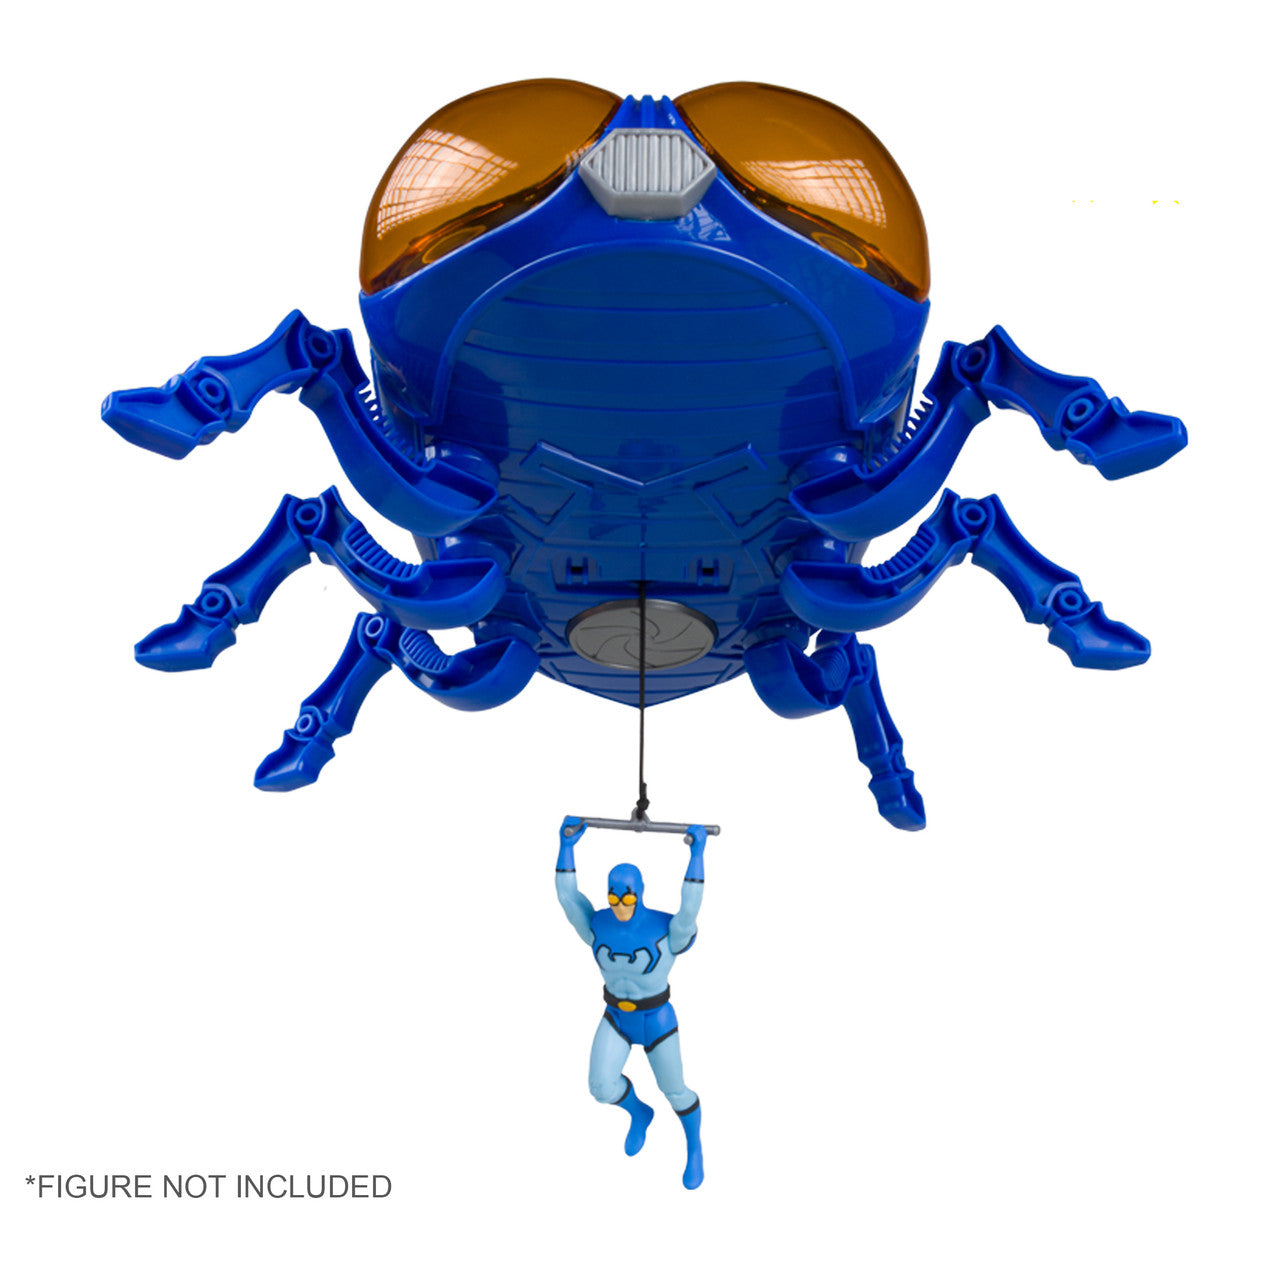 DC Super Powers Wave 3 - The Bug: Blue Beetle's Aerial Mobile Headquarters Vehicle